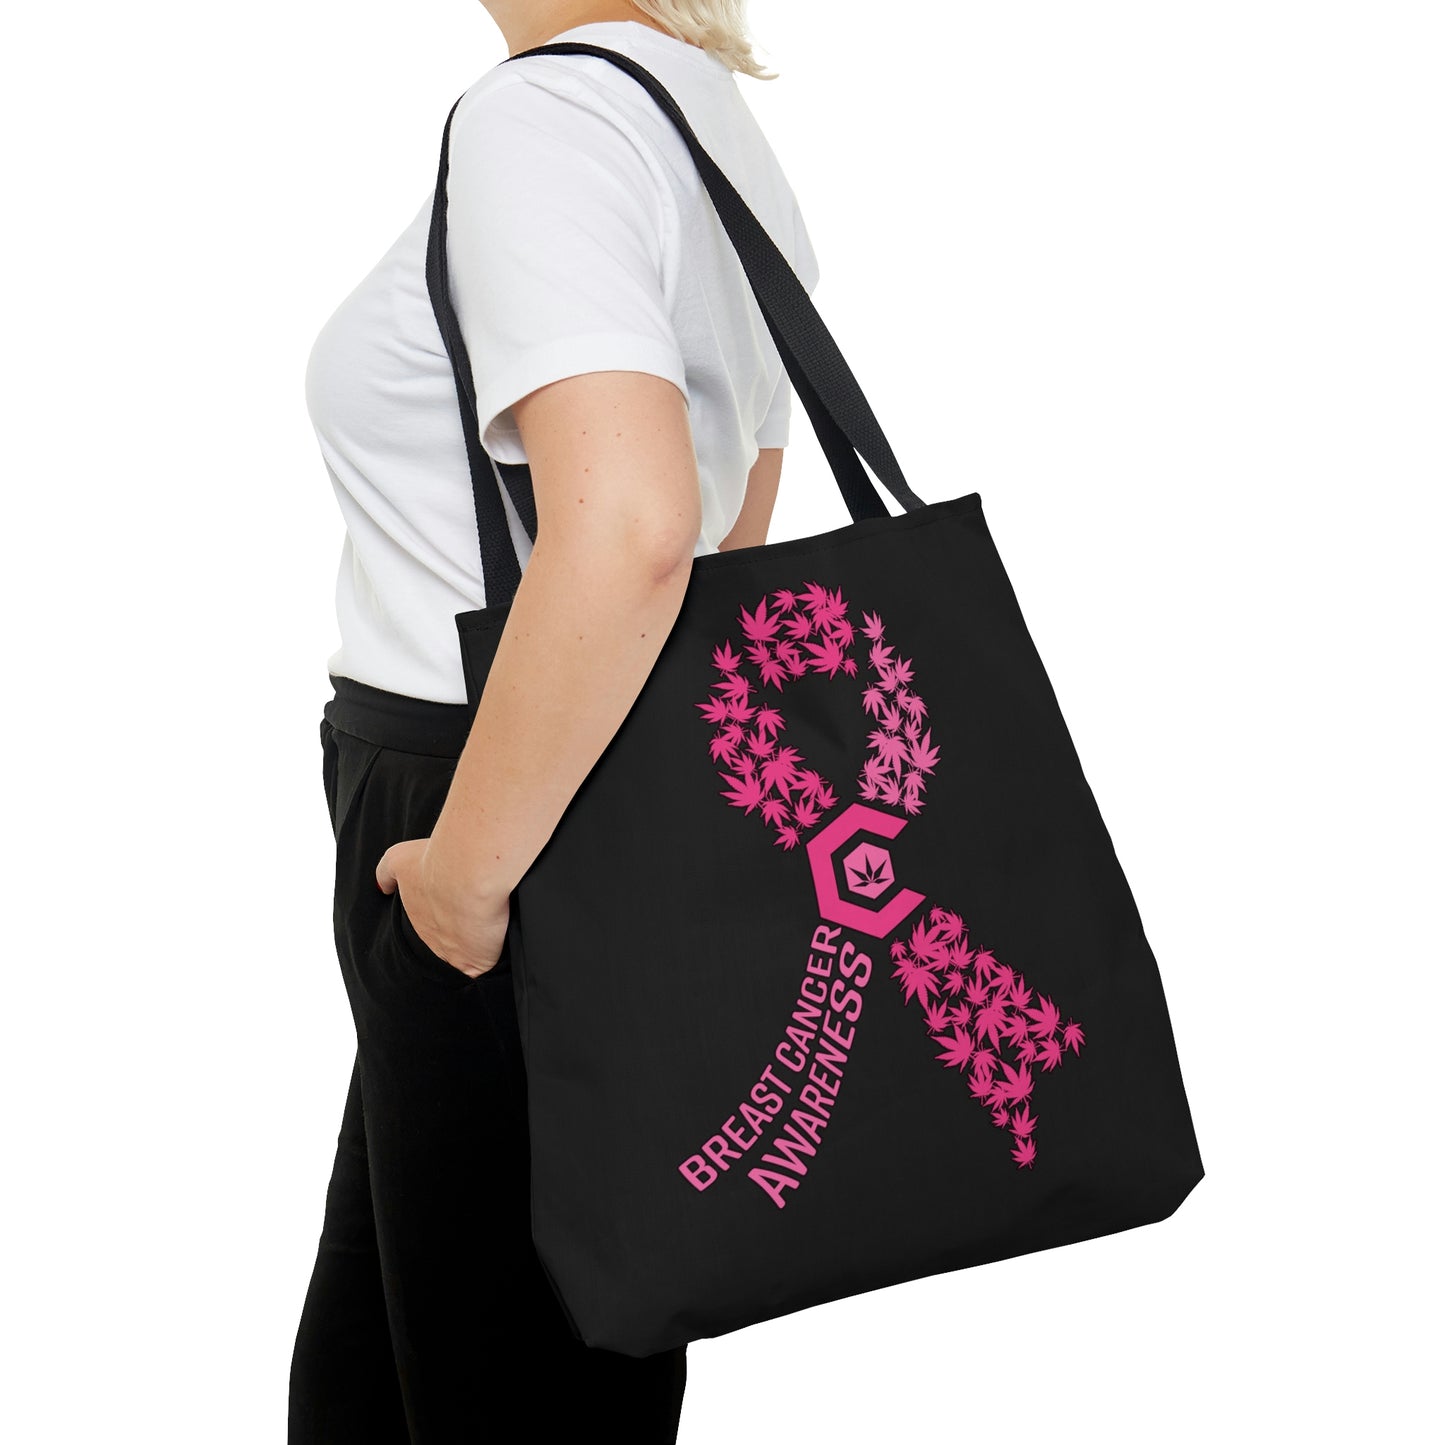 A woman with black pants wears the Breast Cancer Awareness Black Tote Bag with Pink weed leaves integrated into the awareness ribbon